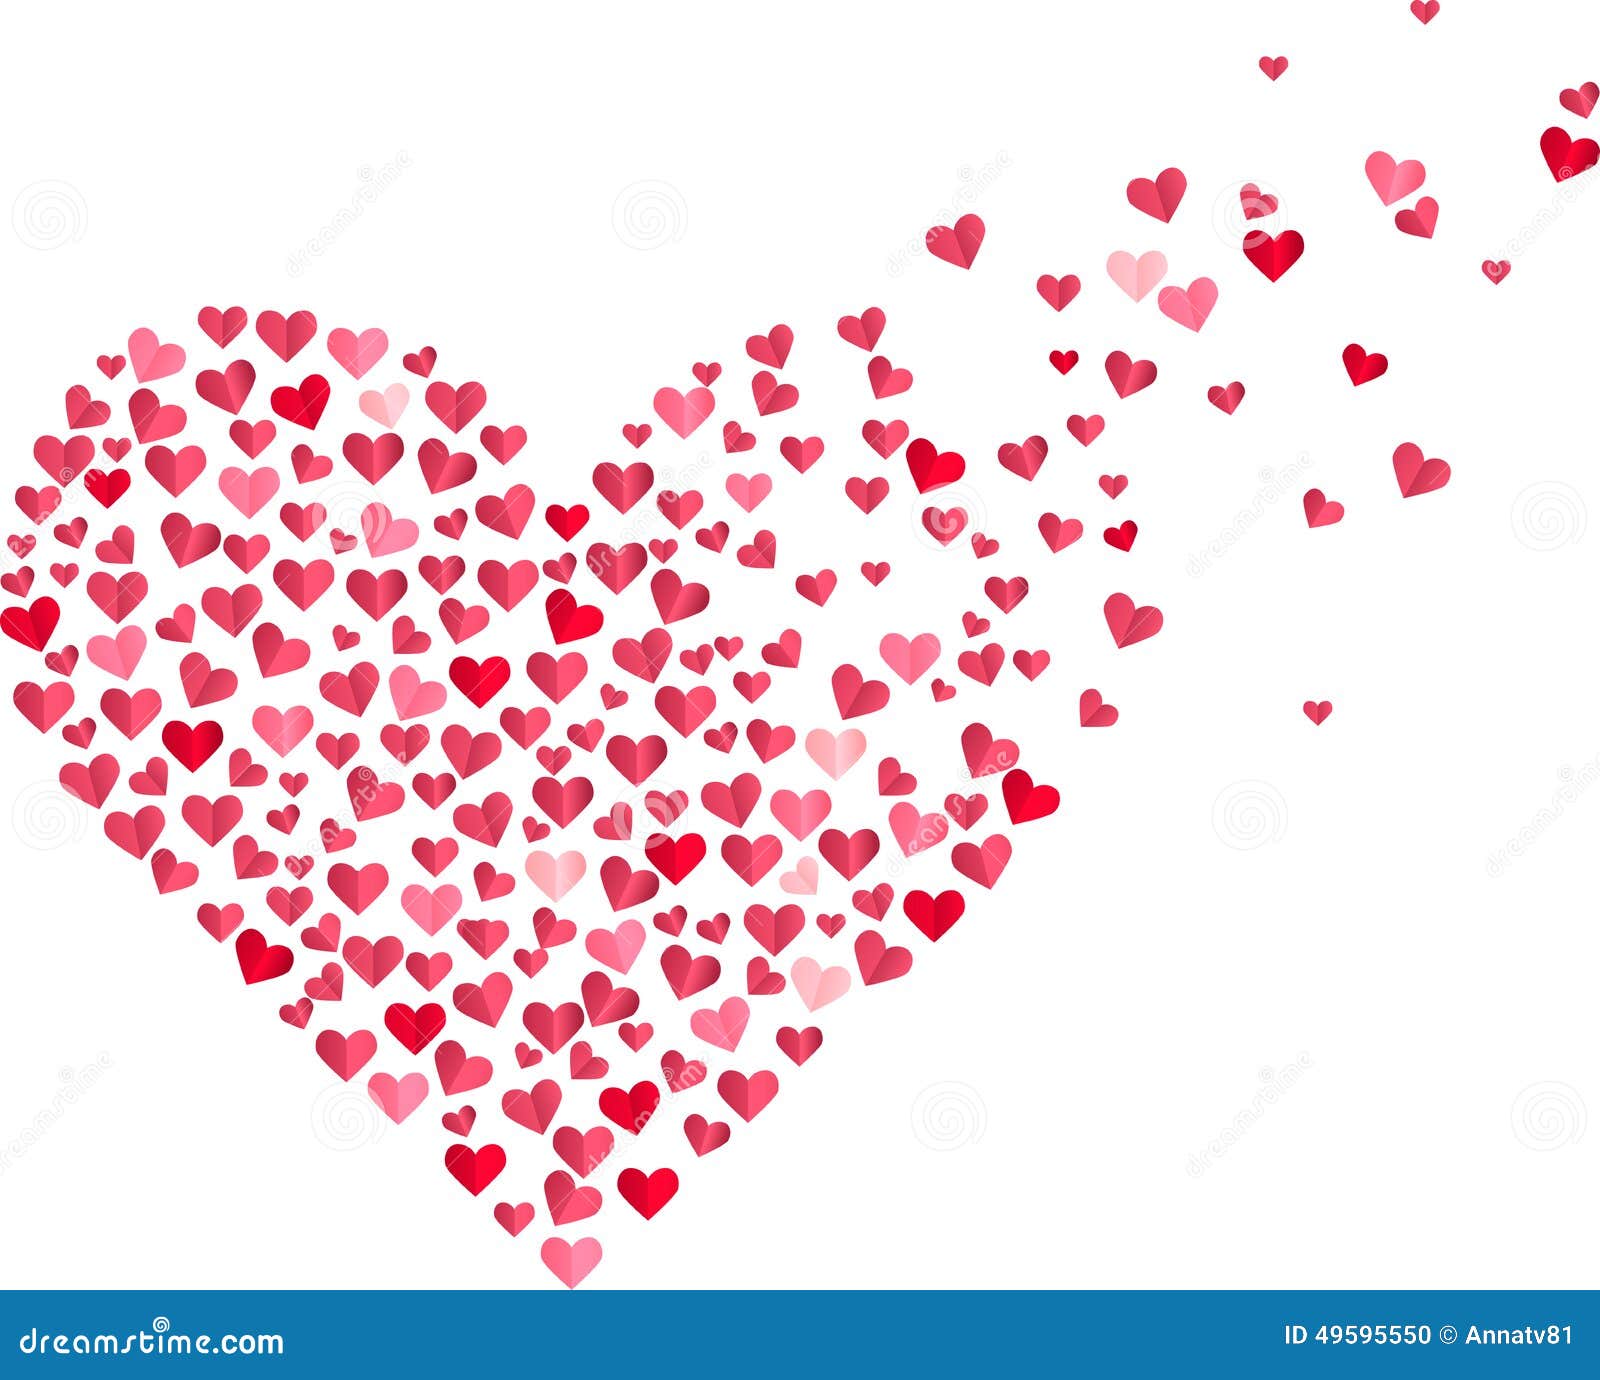 Red Heart Made Of Small Confetti Hearts Stock Vector - Image: 49595550